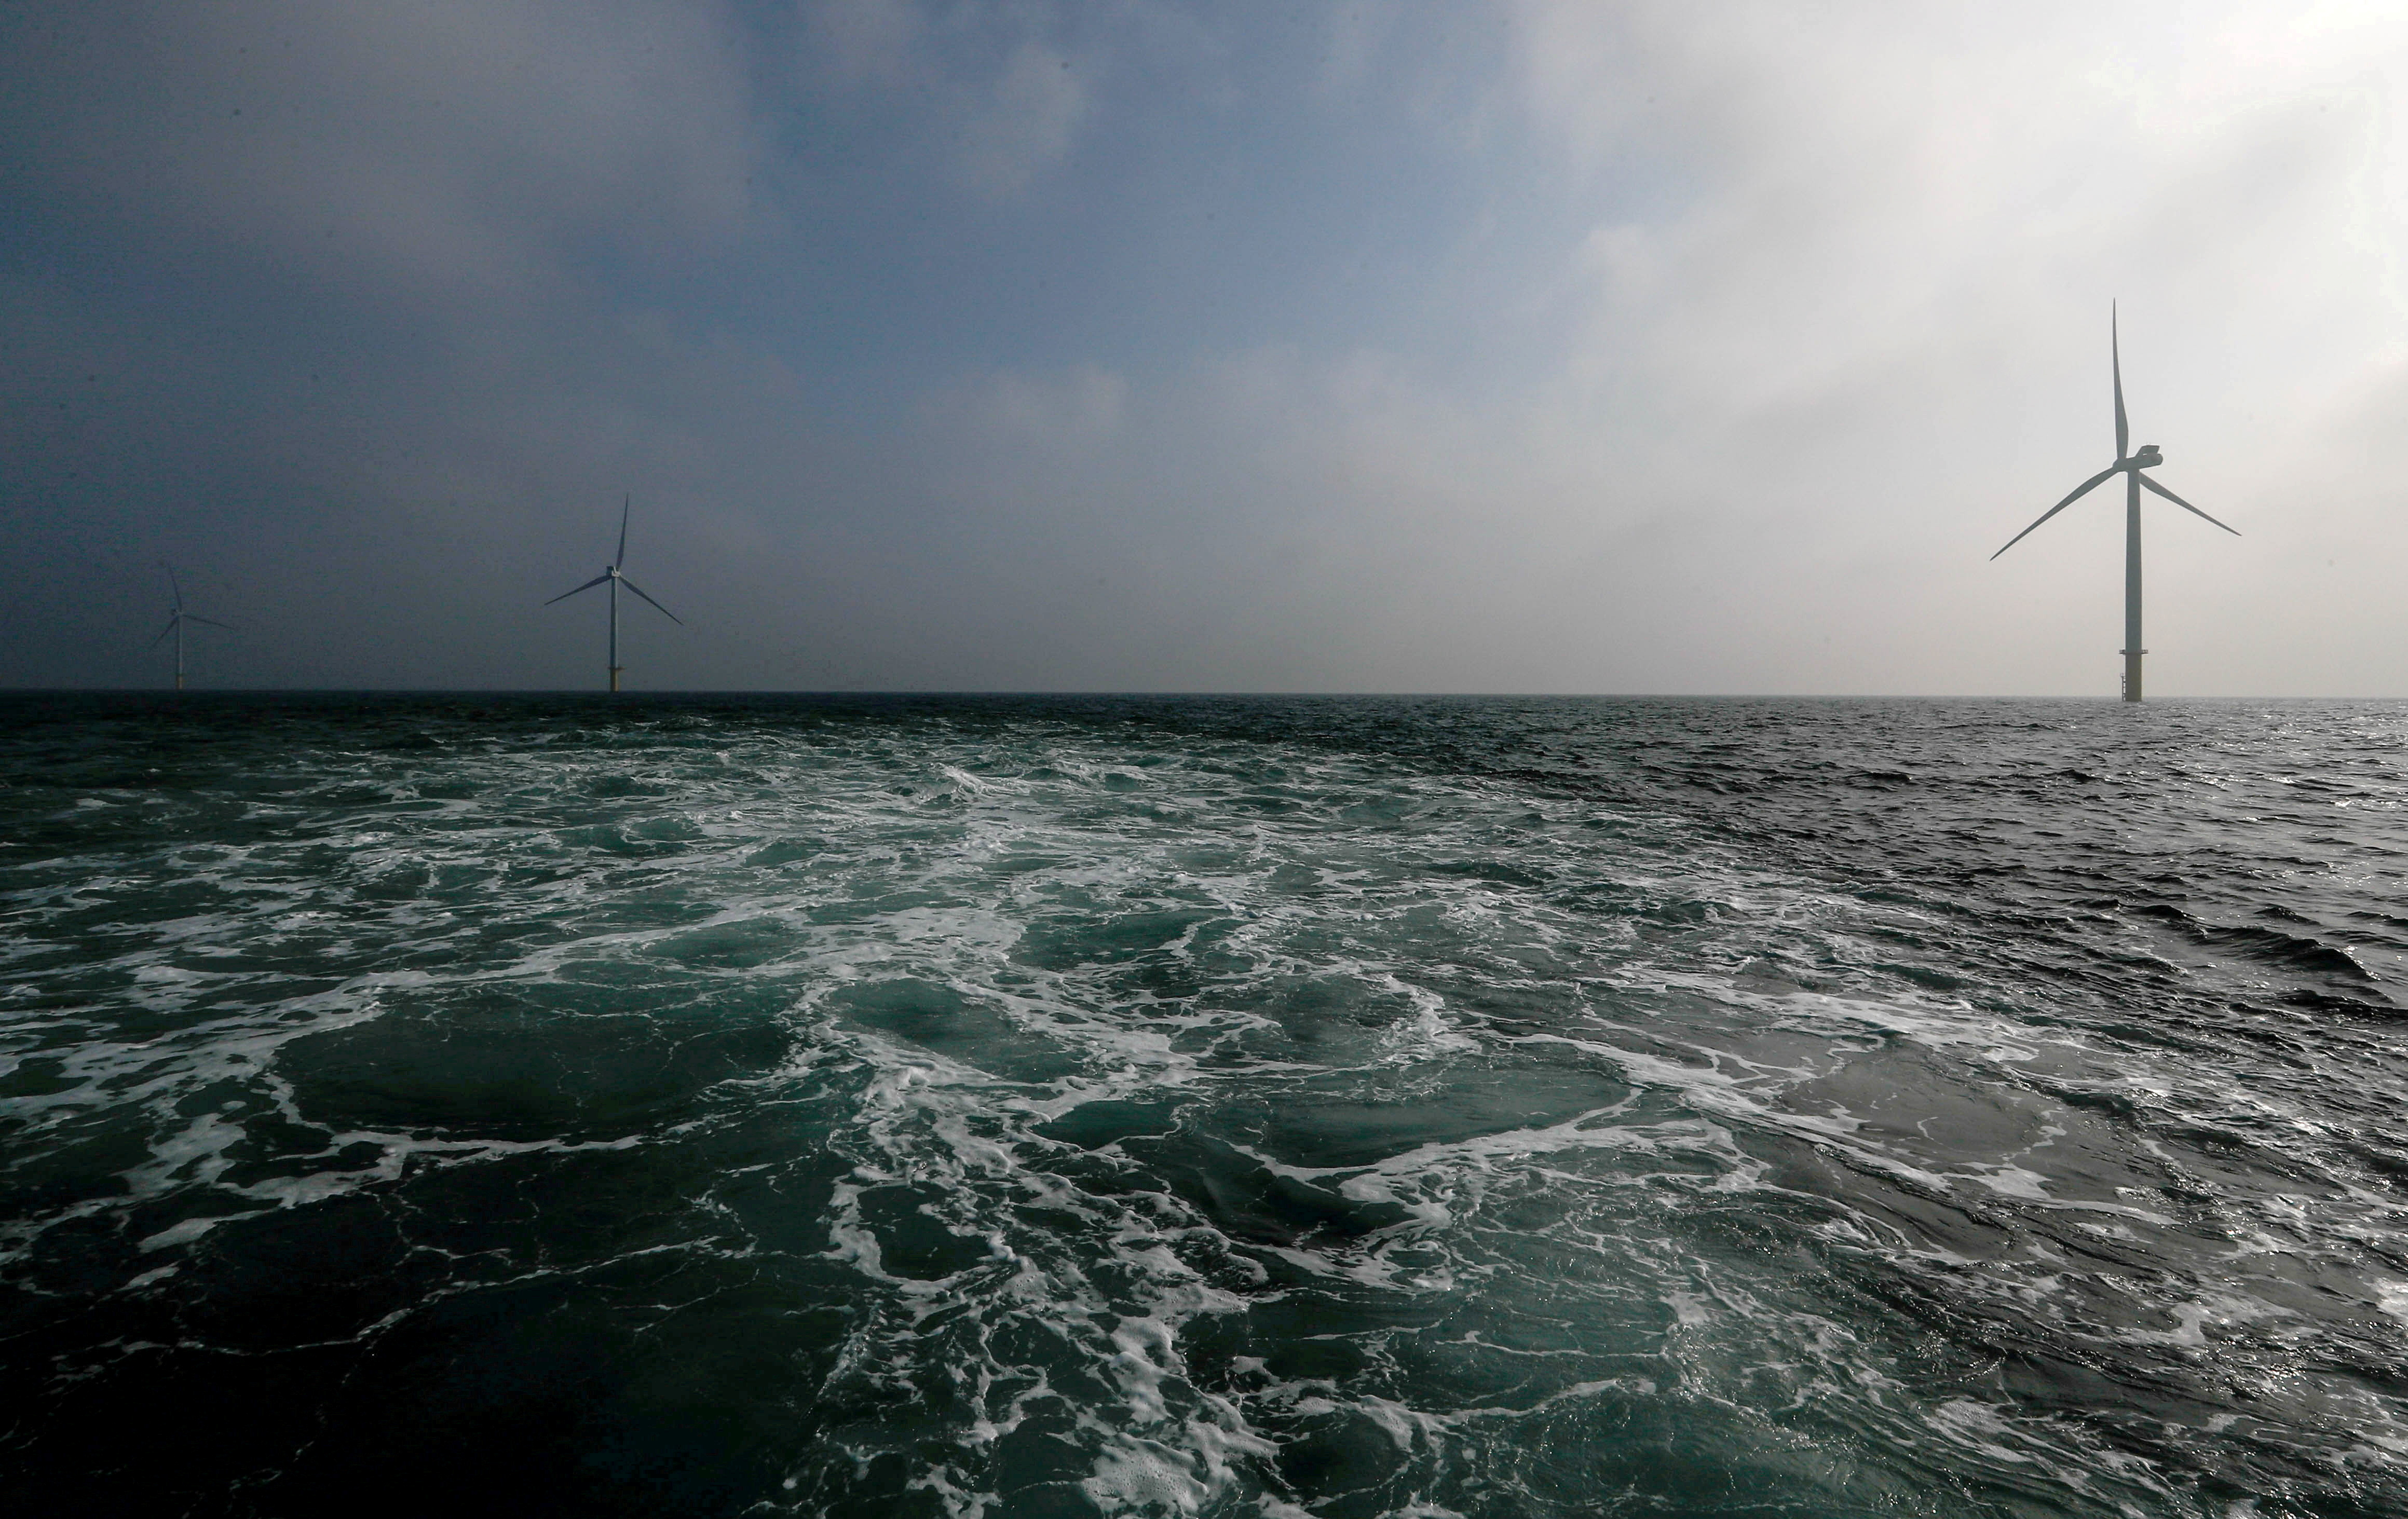 Power-generating windmill turbines are seen at the Eneco Luchterduinen offshore wind farm near Amsterdam, Netherlands September 26, 2017. REUTERS/Yves Herman/File Photo